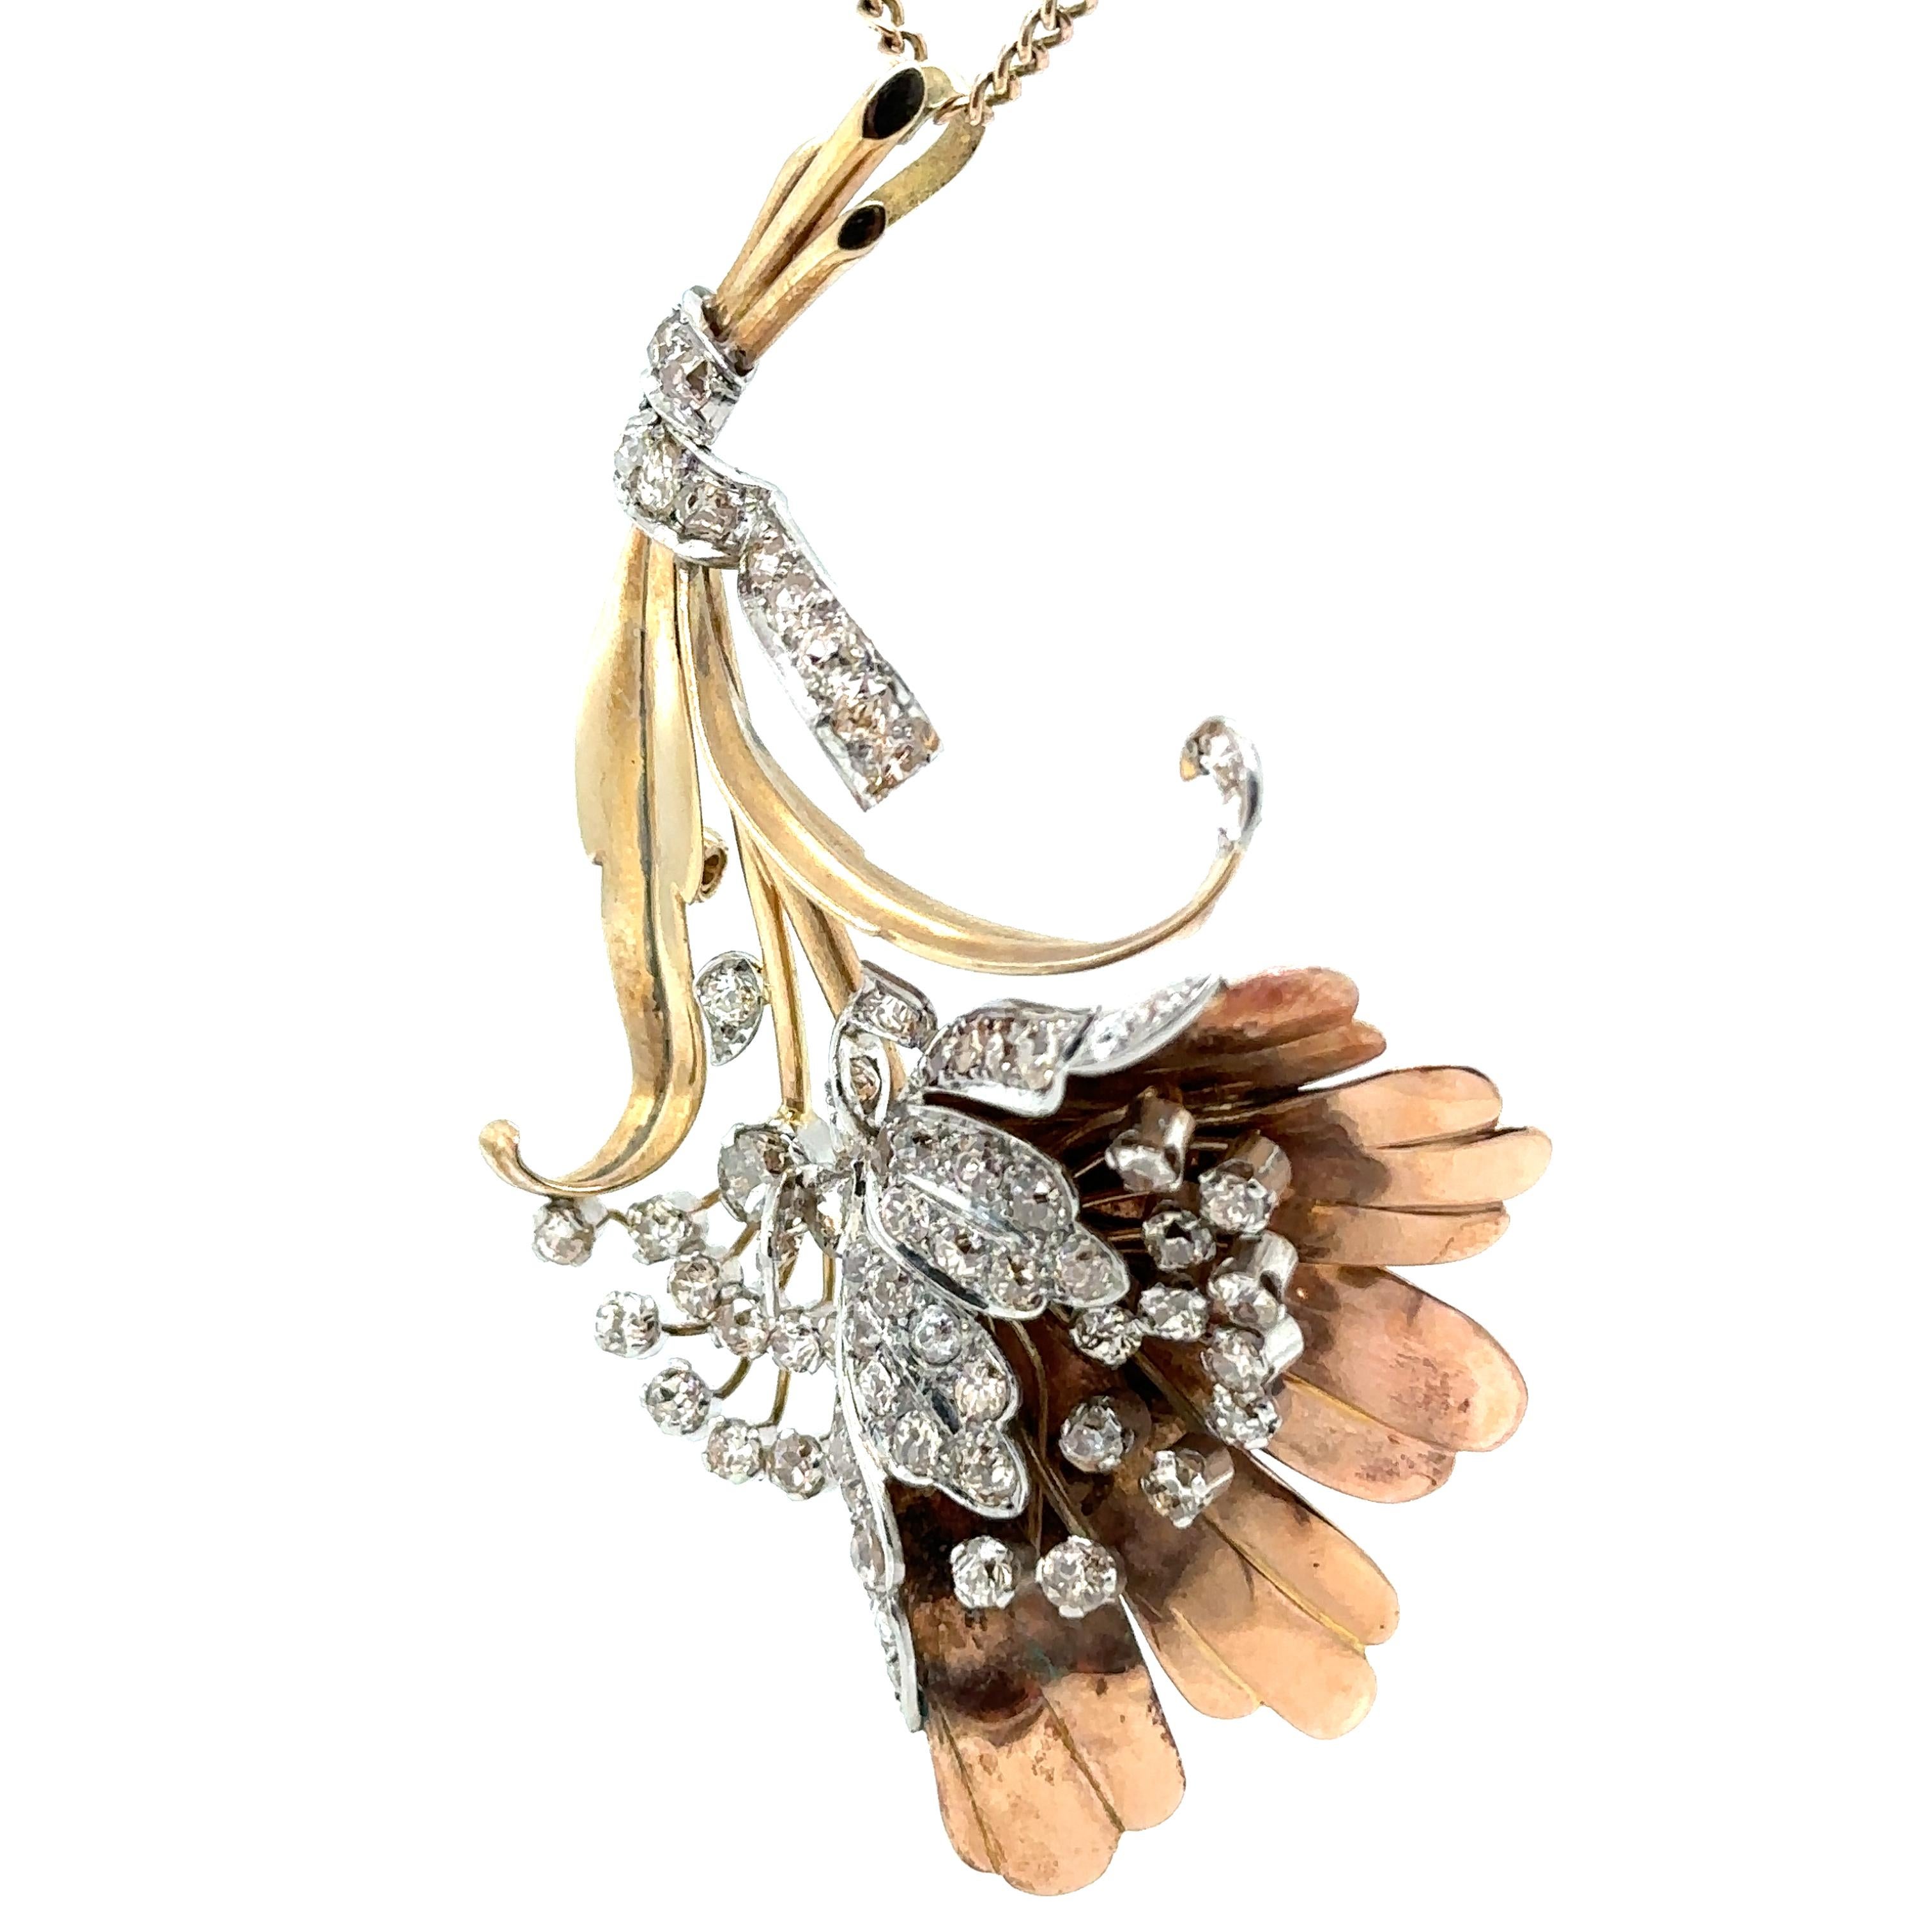 An Antique Diamond Floral Pendant, with 72 Old Cut Diamonds set in Platinum and 9ct Yellow and Rose Gold and suspended on a 14ct Yellow Gold curb link neck chain (Converted from a brooch).

Diamonds 72 = 6.20ct (estimated), Graded in setting as